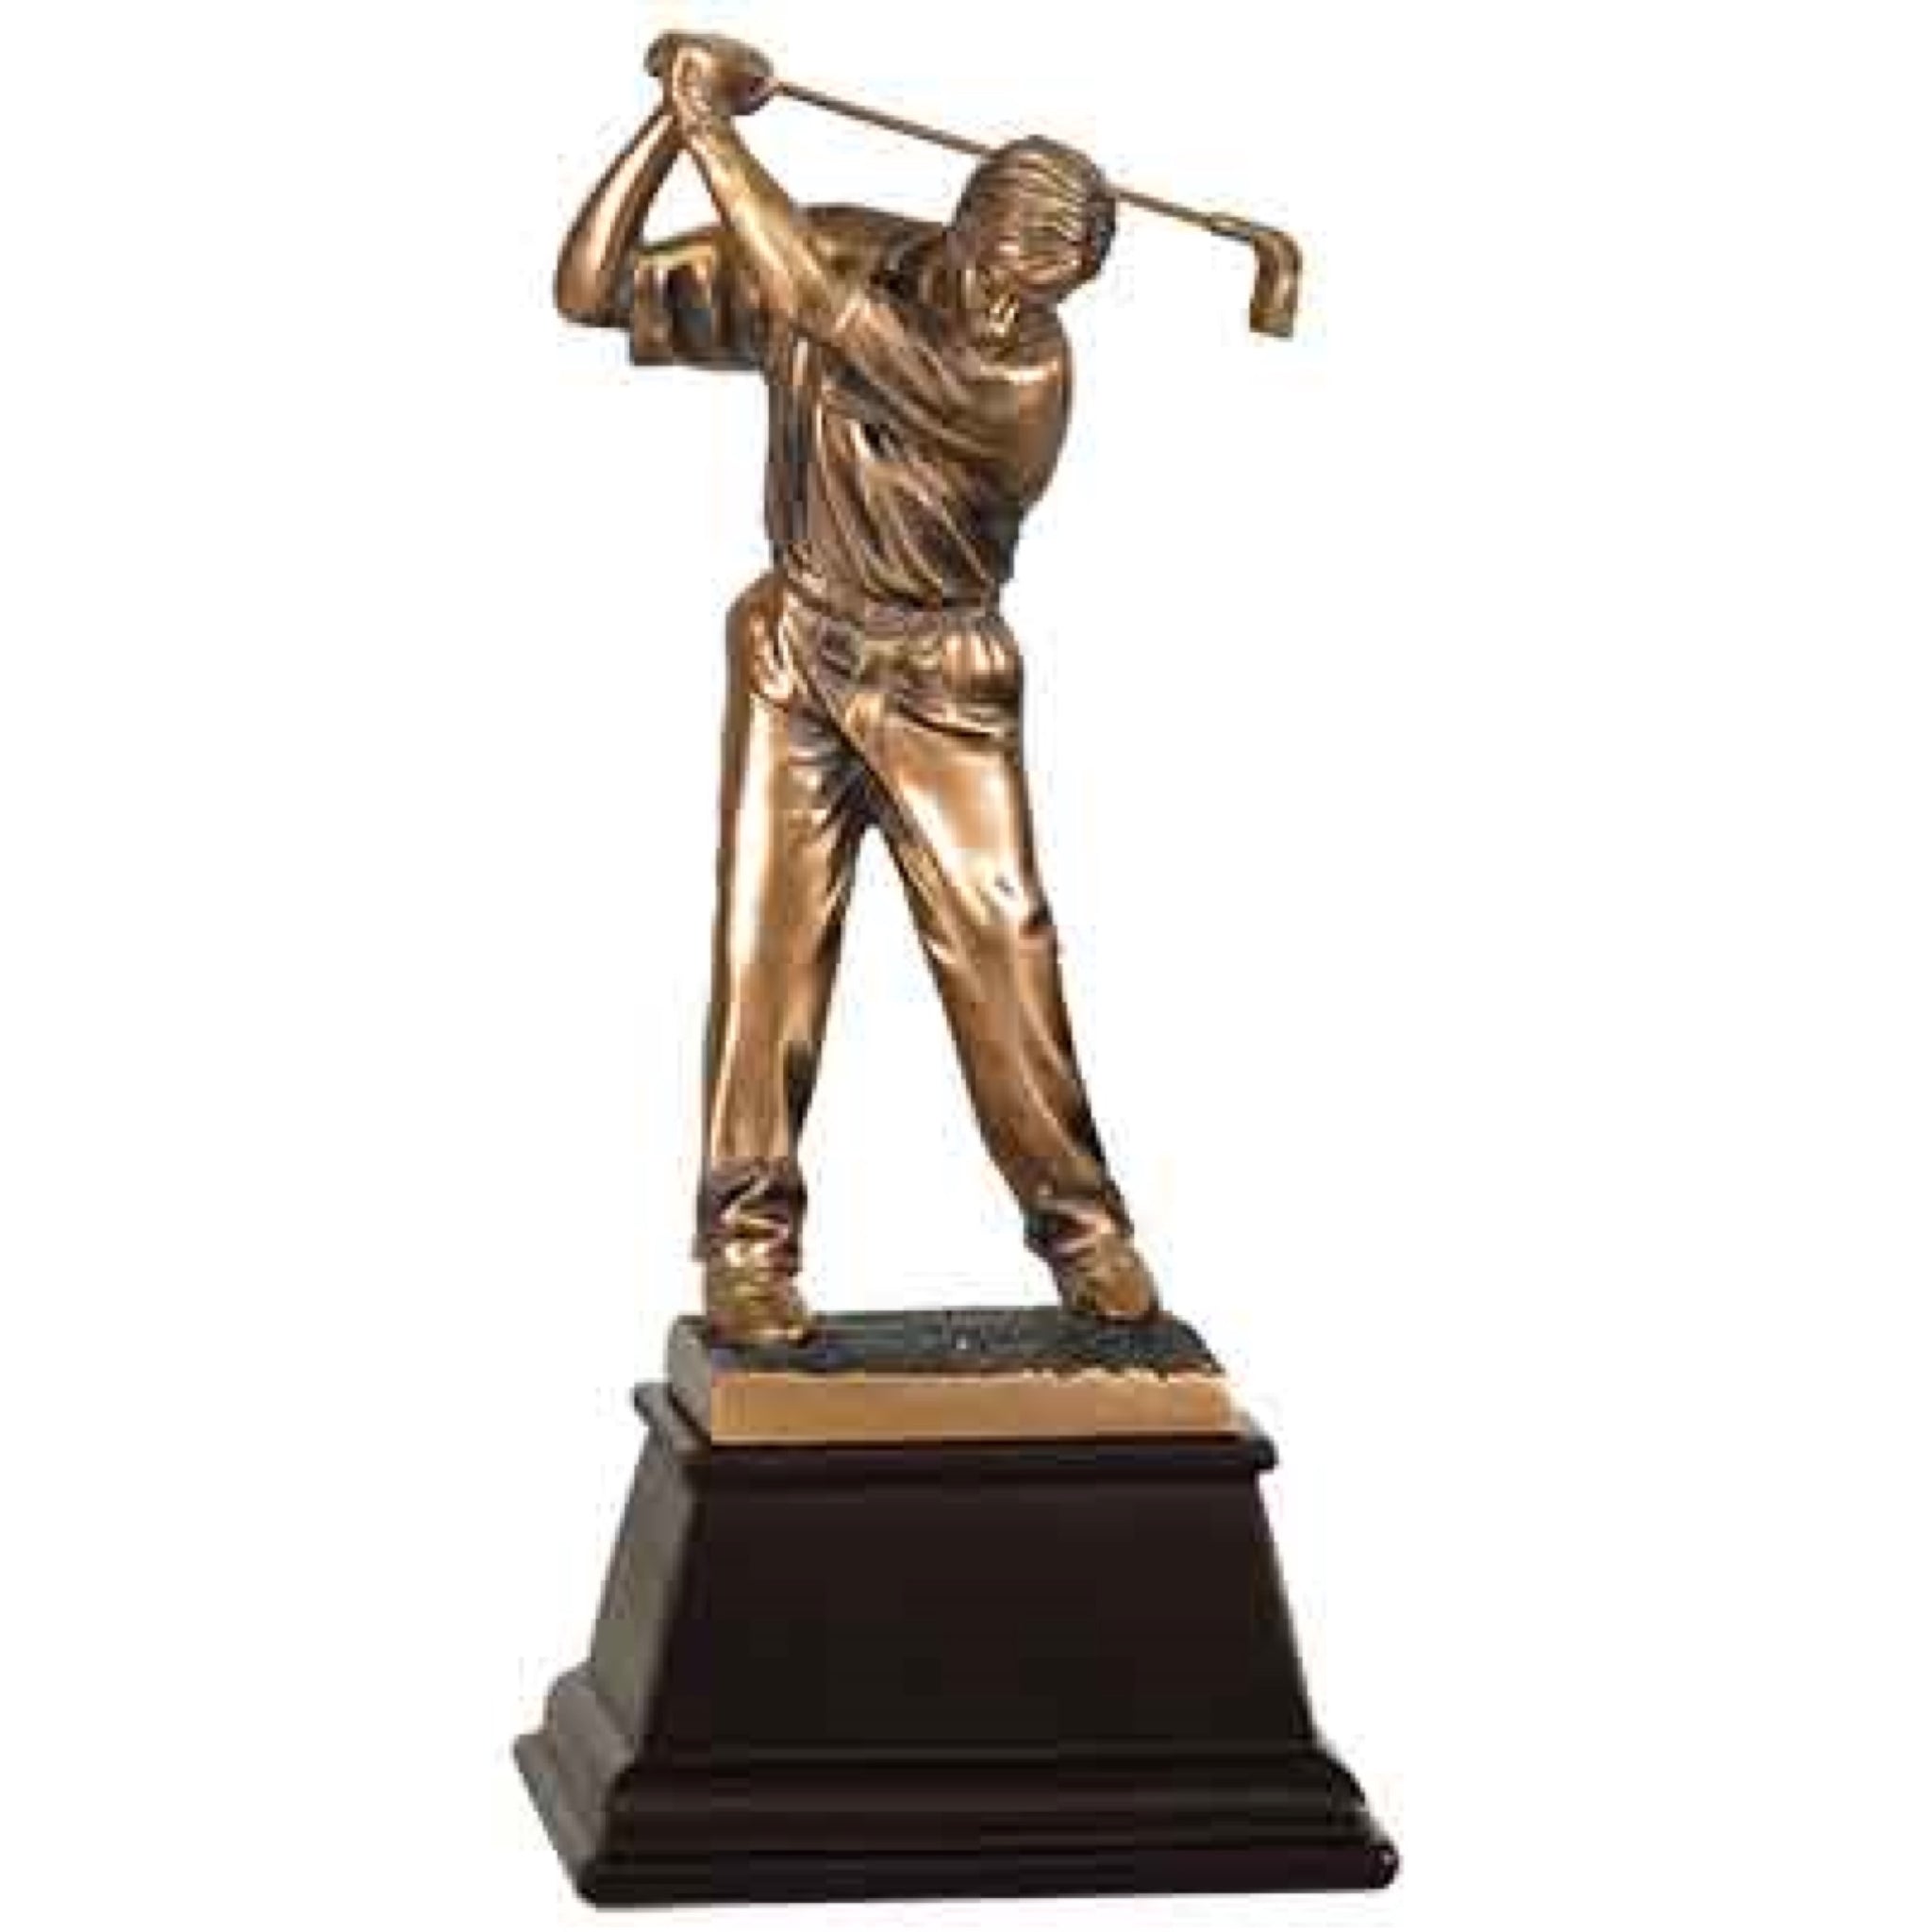 Medium sized bronze golf trophy on a tapered square dark wood base. The bronze male golfer has his head down and his club is behind his head as if he is about to swing it.